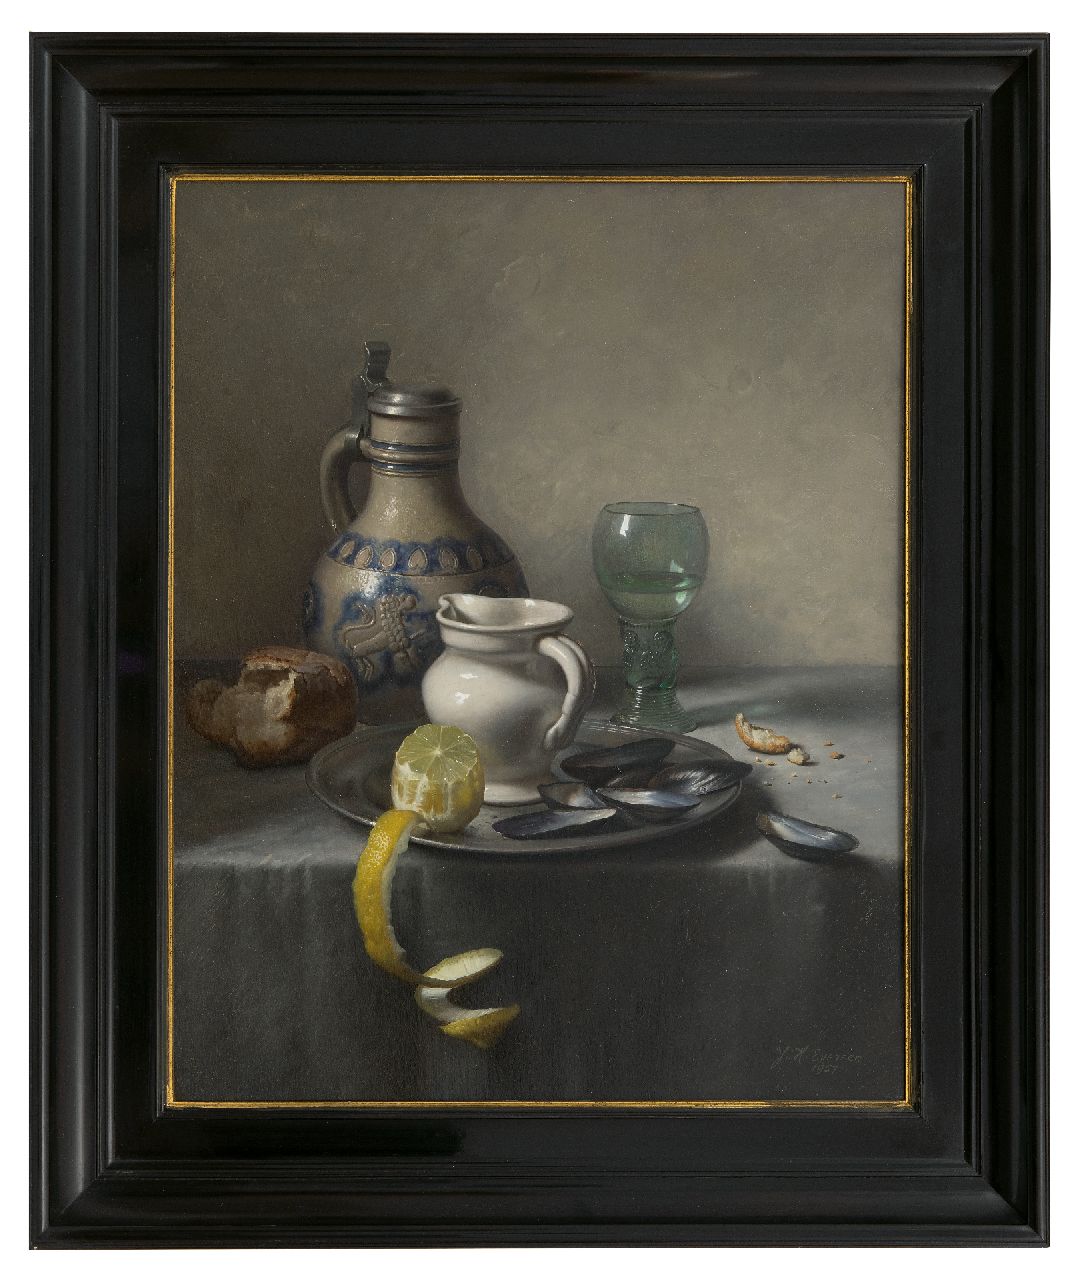 Eversen J.H.  | Johannes Hendrik 'Jan' Eversen | Paintings offered for sale | Still Life with Roemer, lemon and mussels, oil on canvas 50.8 x 40.9 cm, signed l.r. and dated 1957